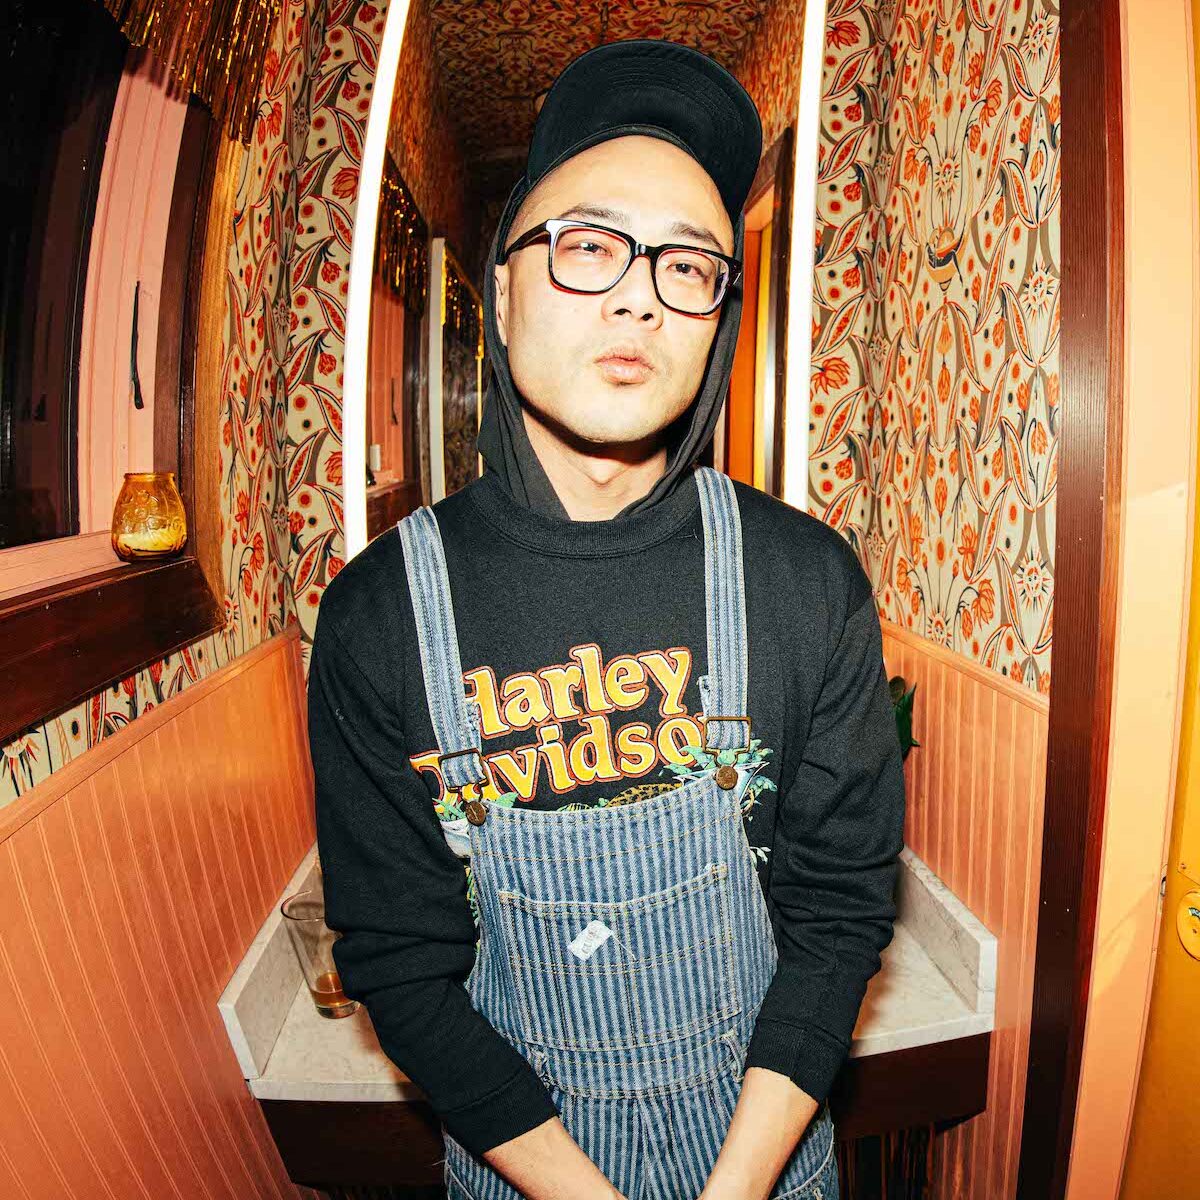 Richard Chiem wearing glasses, a baseball cap, overalls, and a Harley Davidson hoodie. He is posed in front of a hallway with patterned wallpaper.